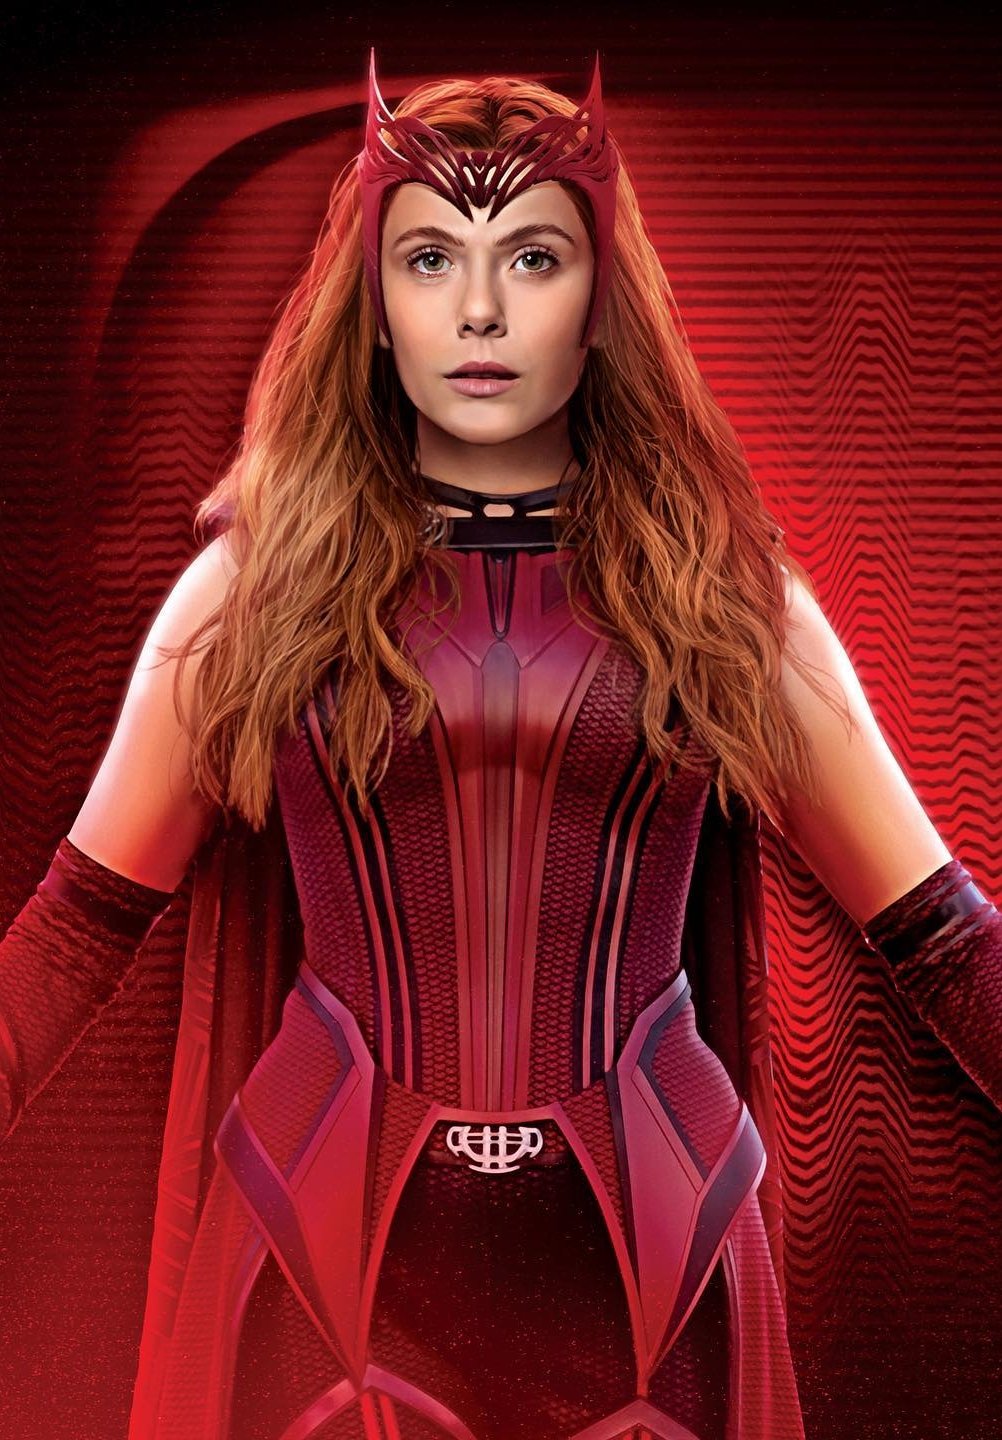 Scarlet Witch. Marvel Cinematic Universe